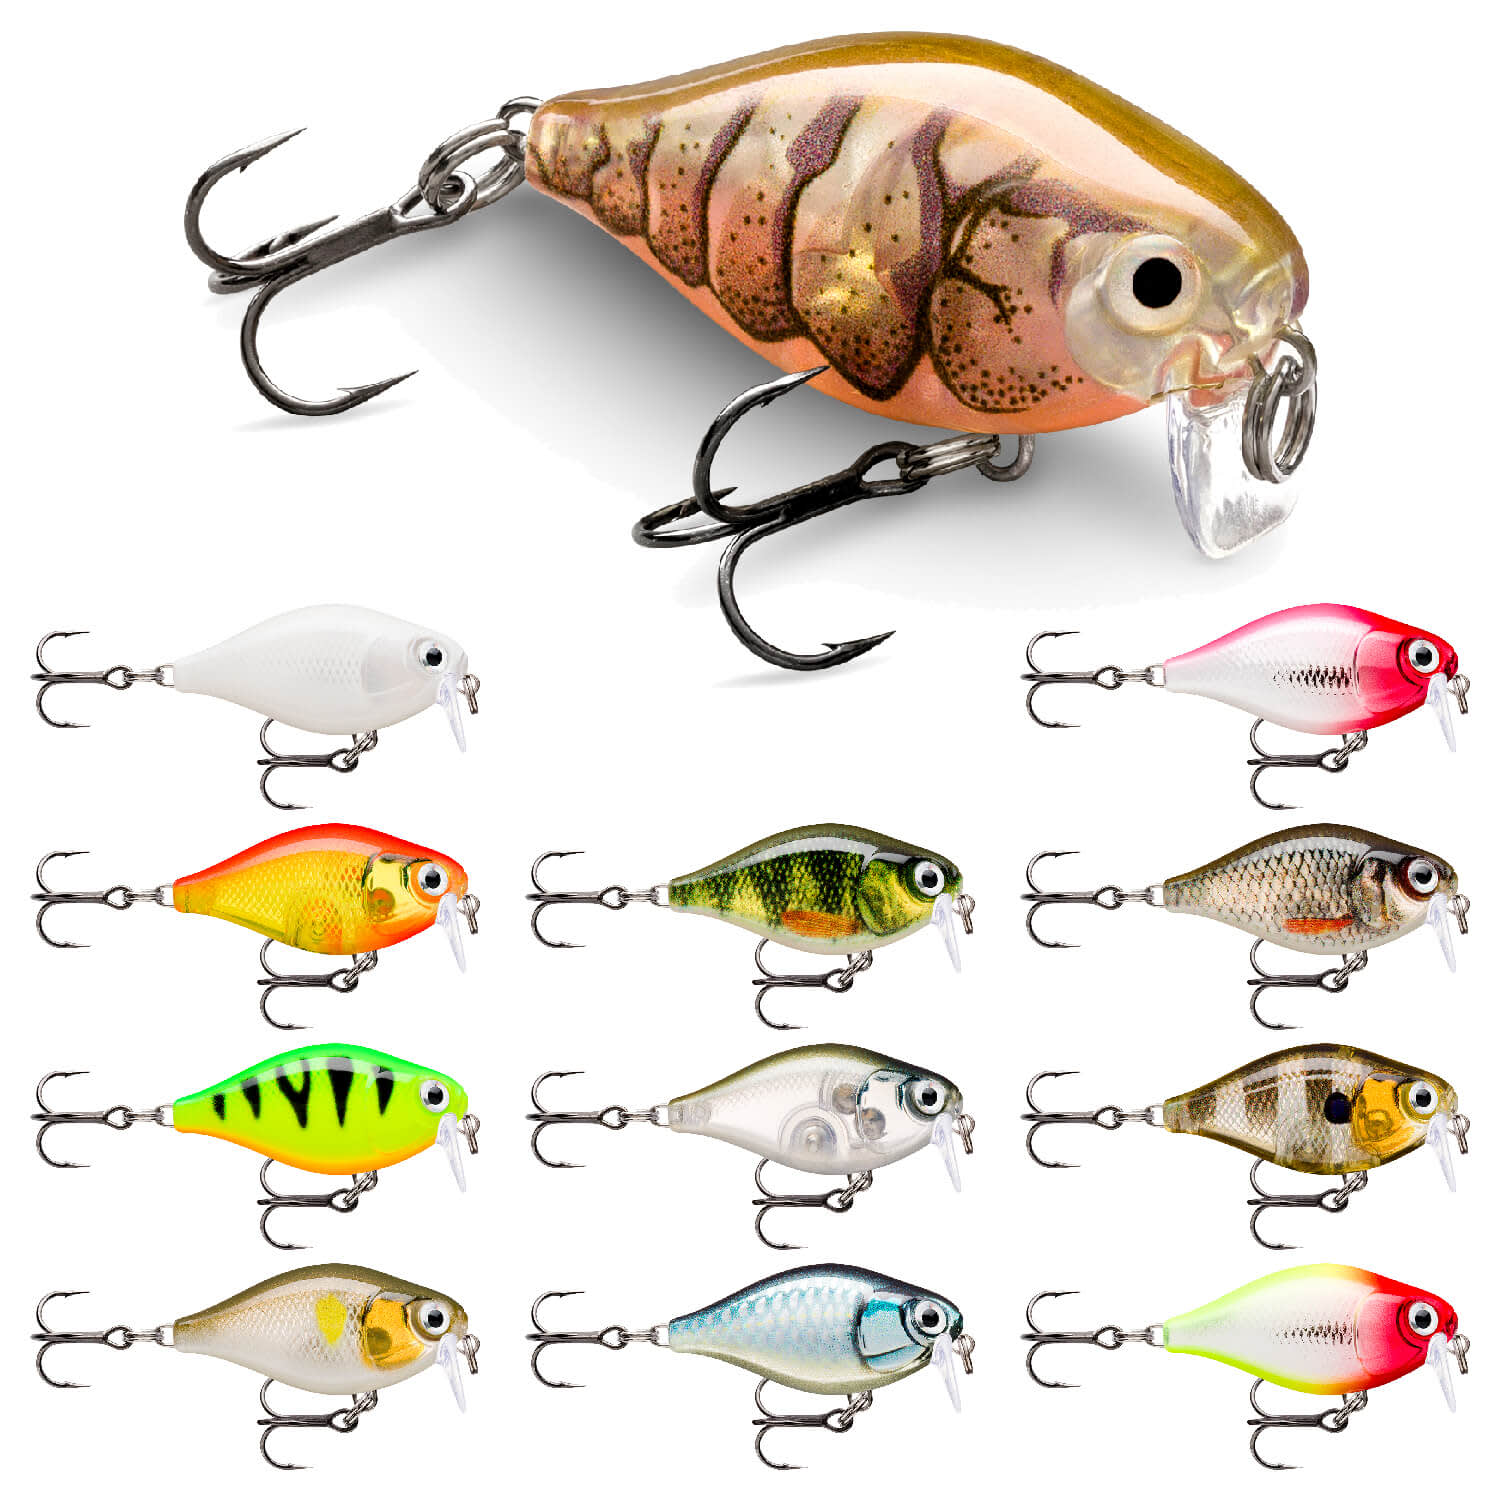 https://koeder-laden.mo.cloudinary.net/out/pictures/master/product/1/rapala-x-light-crank-shallow-runner-alle.jpg